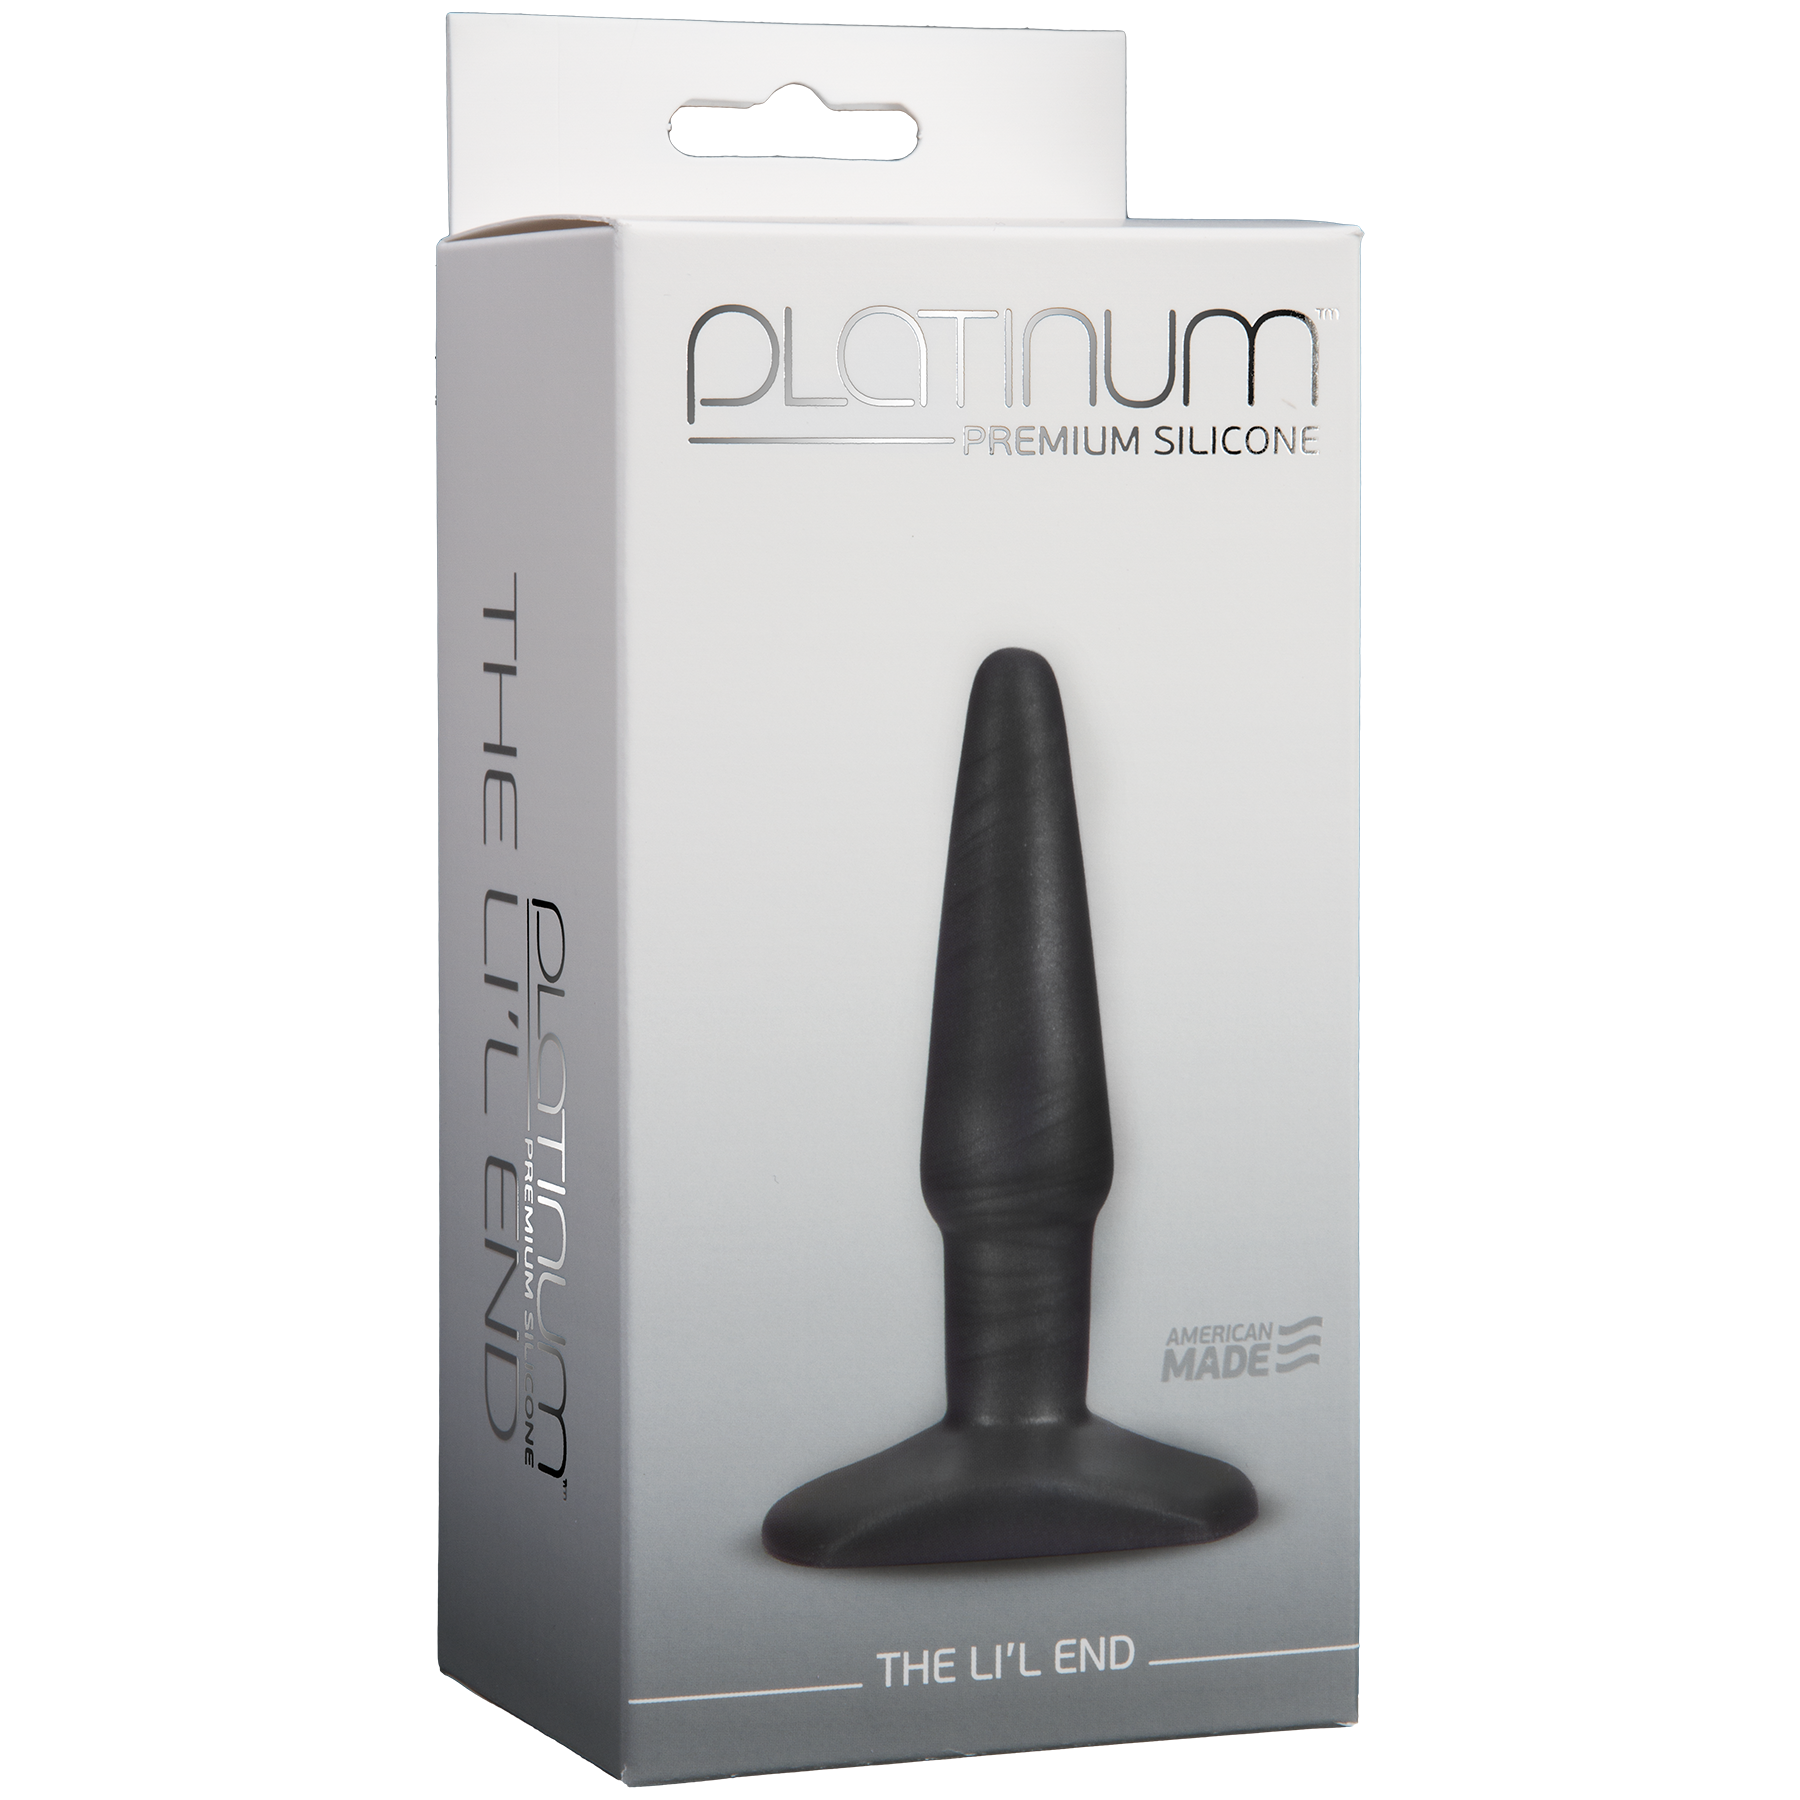 Platinum Premium Silicone The Li'l End - Charcoal - Thorn & Feather